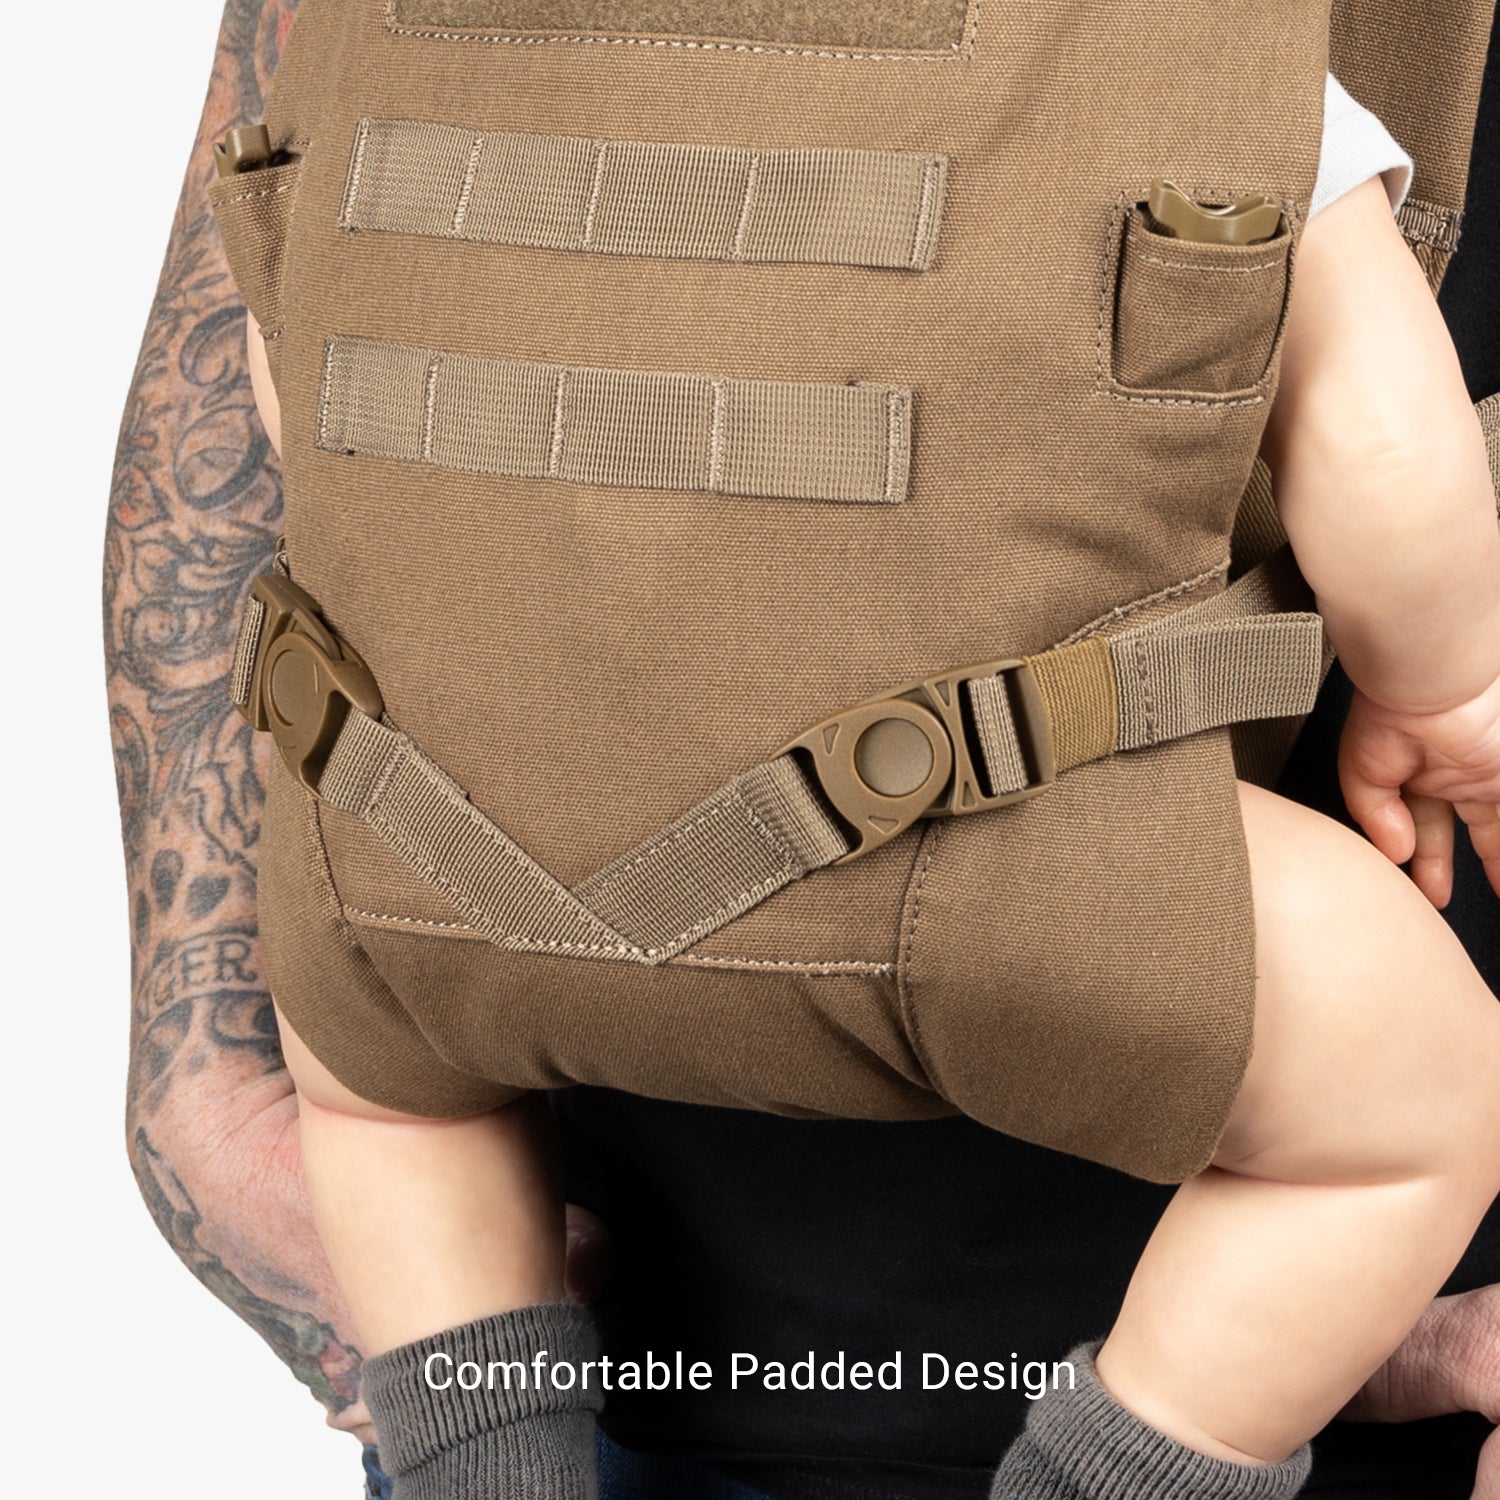 baby carrier bag